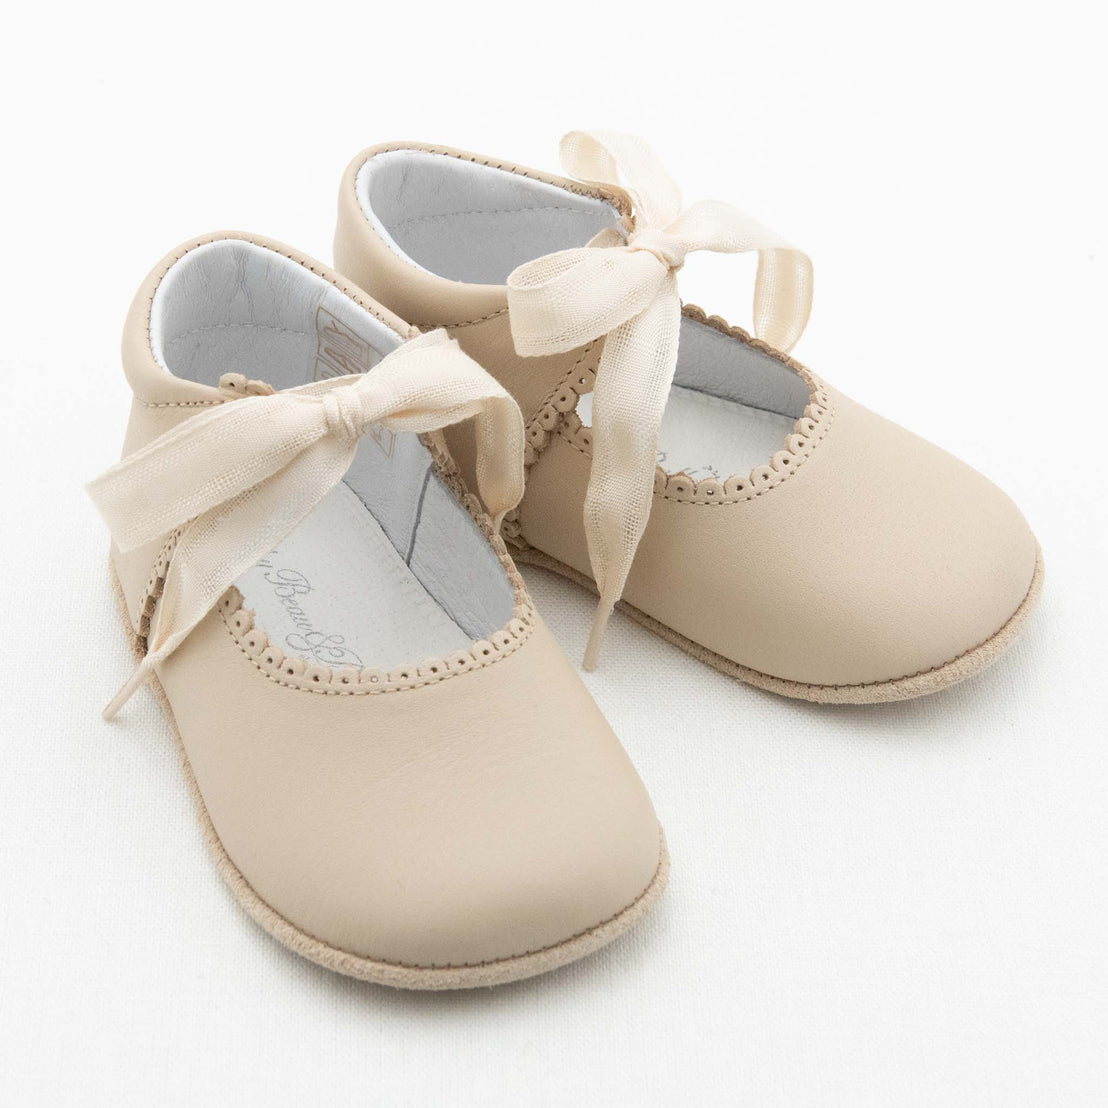 A pair of Tan Tie Mary Janes with satin ribbon ties and scalloped trim rests on a white surface. These handmade beige baby shoes feature a soft, rounded toe and a simple, elegant design. The interior lining is crisp white, showcasing the quality typical of Baby Beau & Belle.